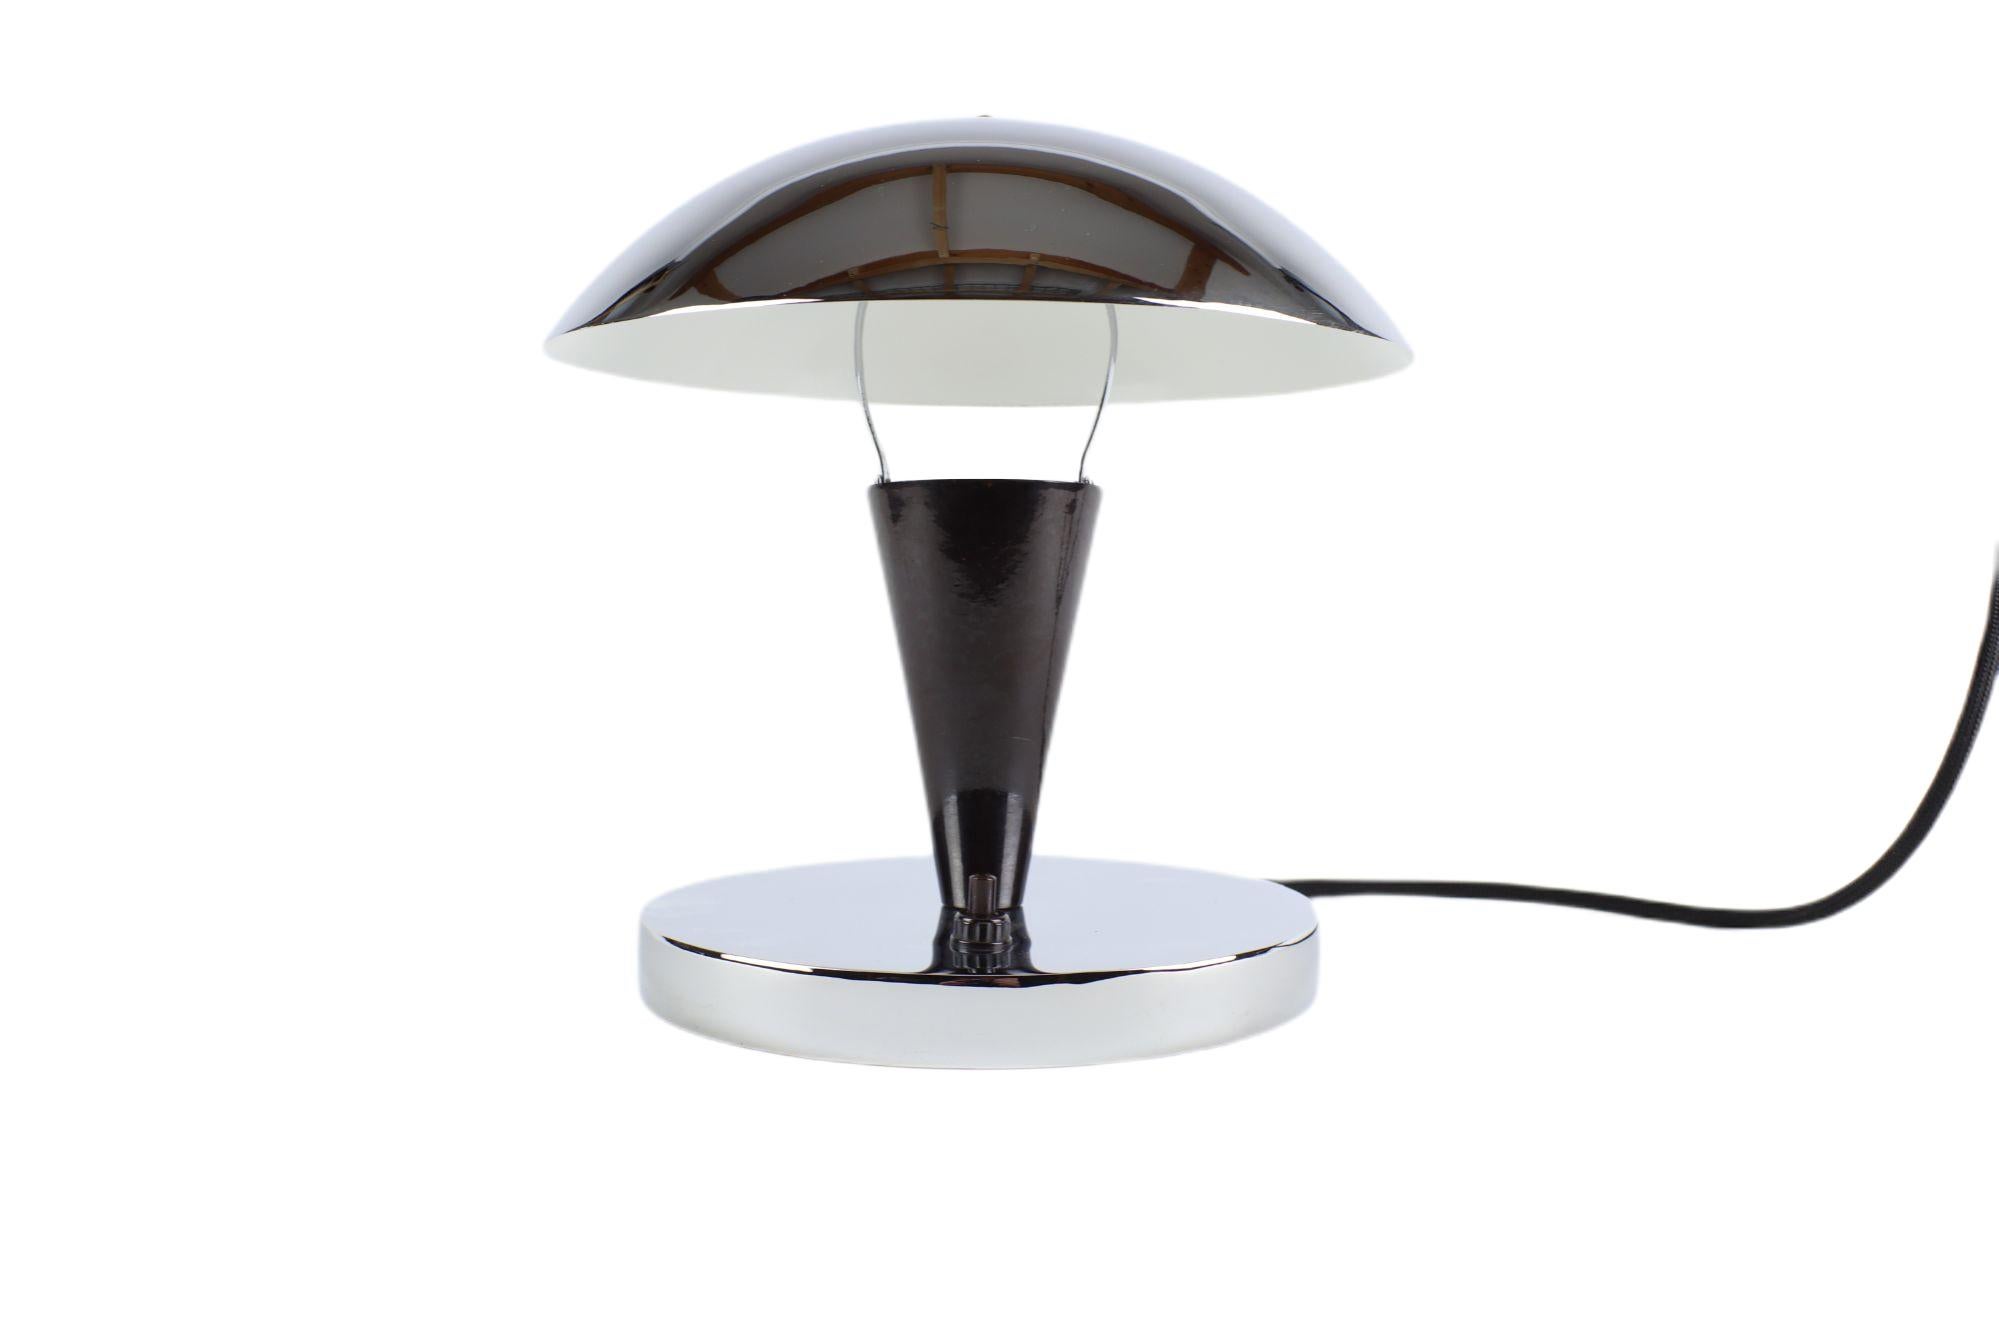 This exclusive functionalist table lamp offers simple shapes and a chrome look. The elegant shape of the mushroom is complemented by a round base. The functional advantage is the tilting luminaire. This little seen and original lamp was made in